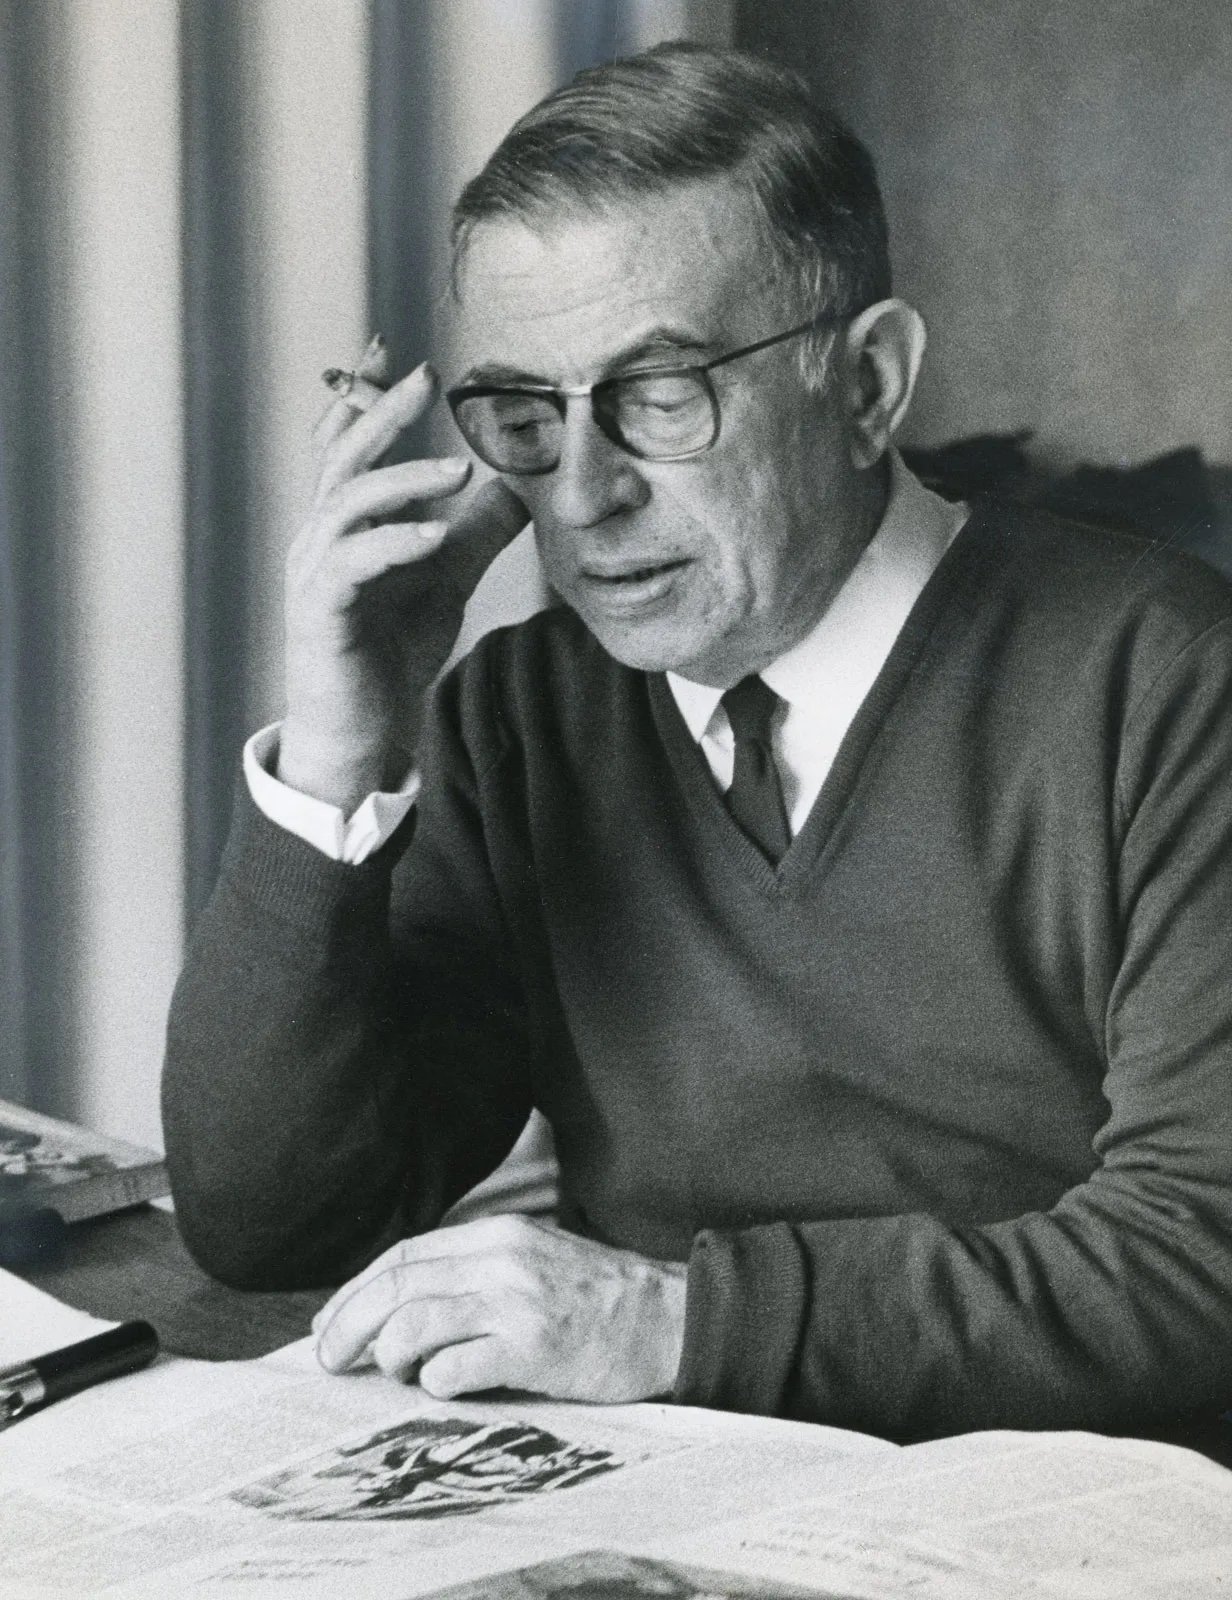 A photograph of Jean Paul Sartre sitting behind a desk, smoking a cigarette and reading a newspaper